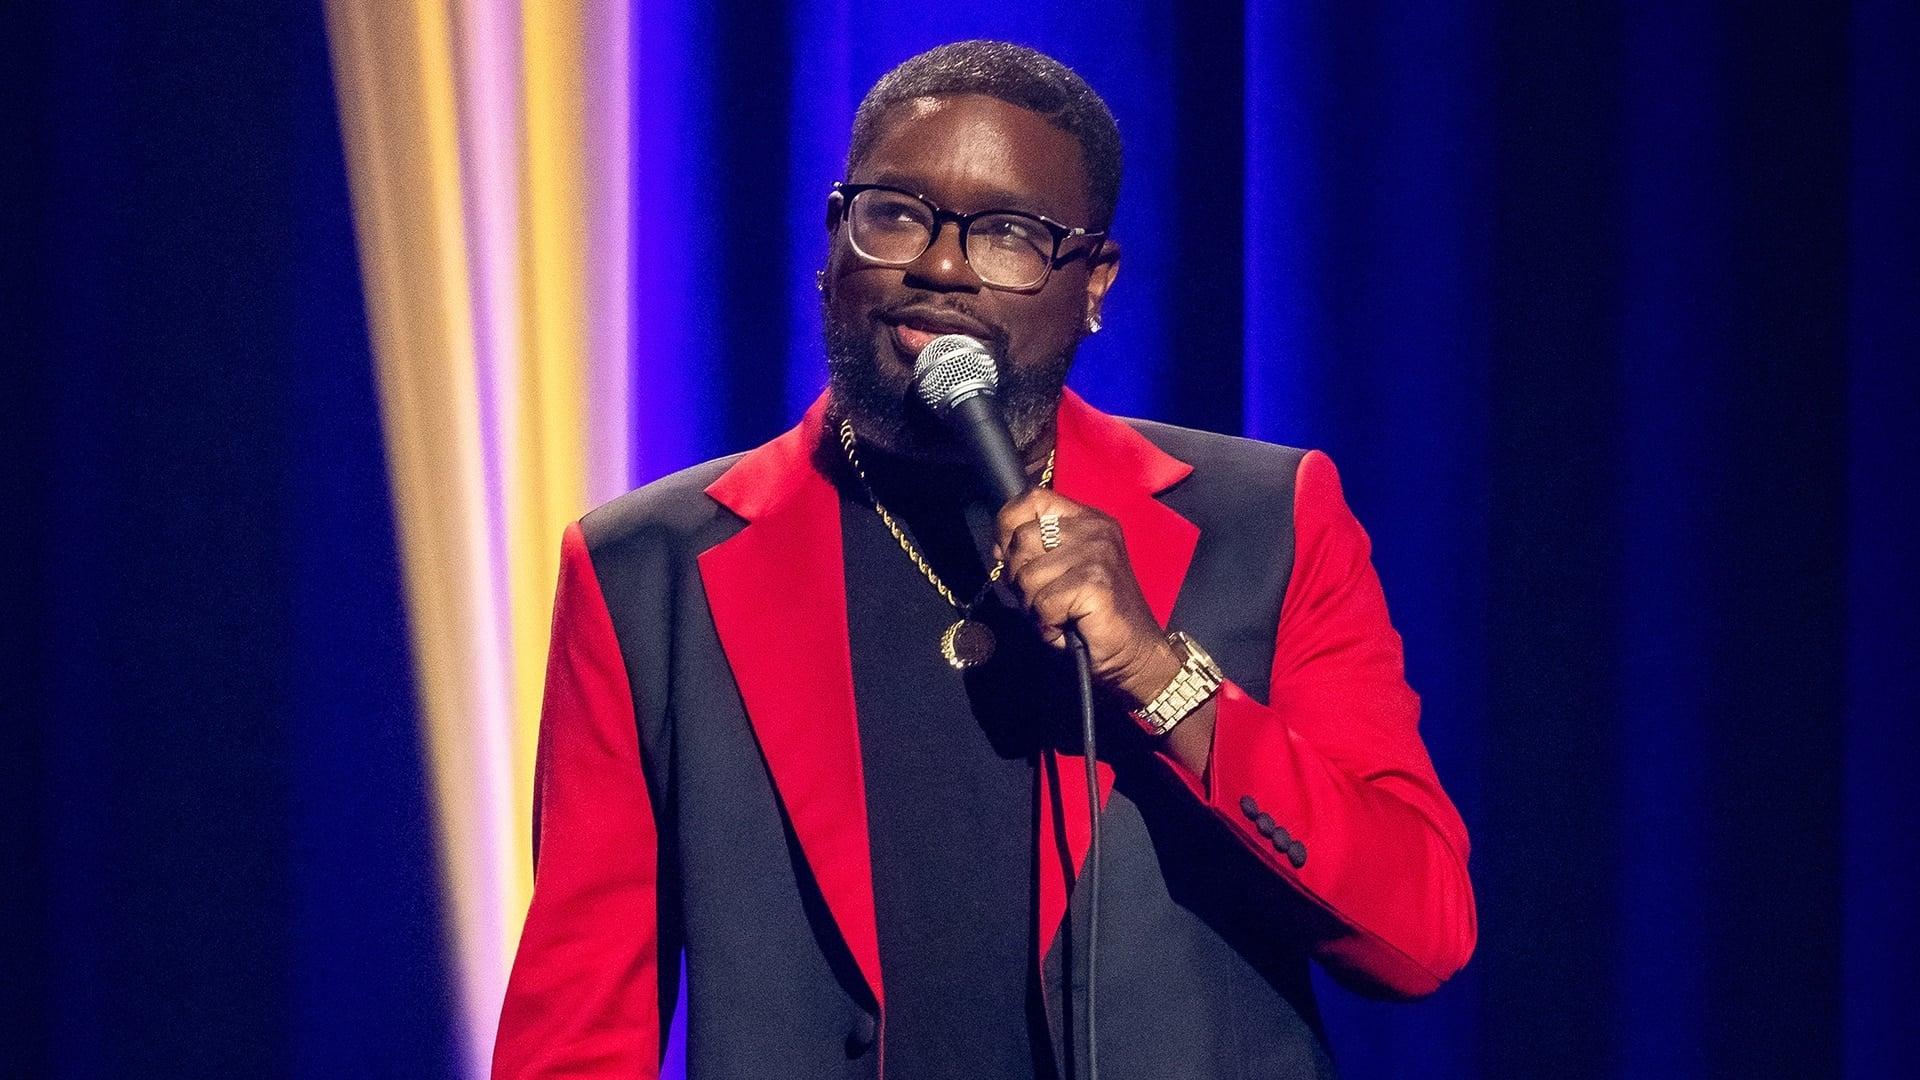 Lil Rel Howery: I Said It. Y'all Thinking It. backdrop